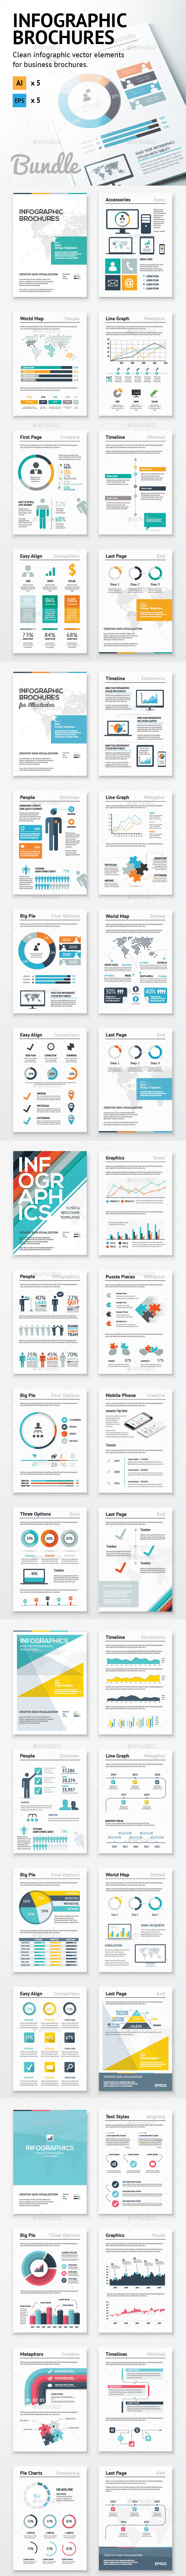 Infographic brochures bundle cover